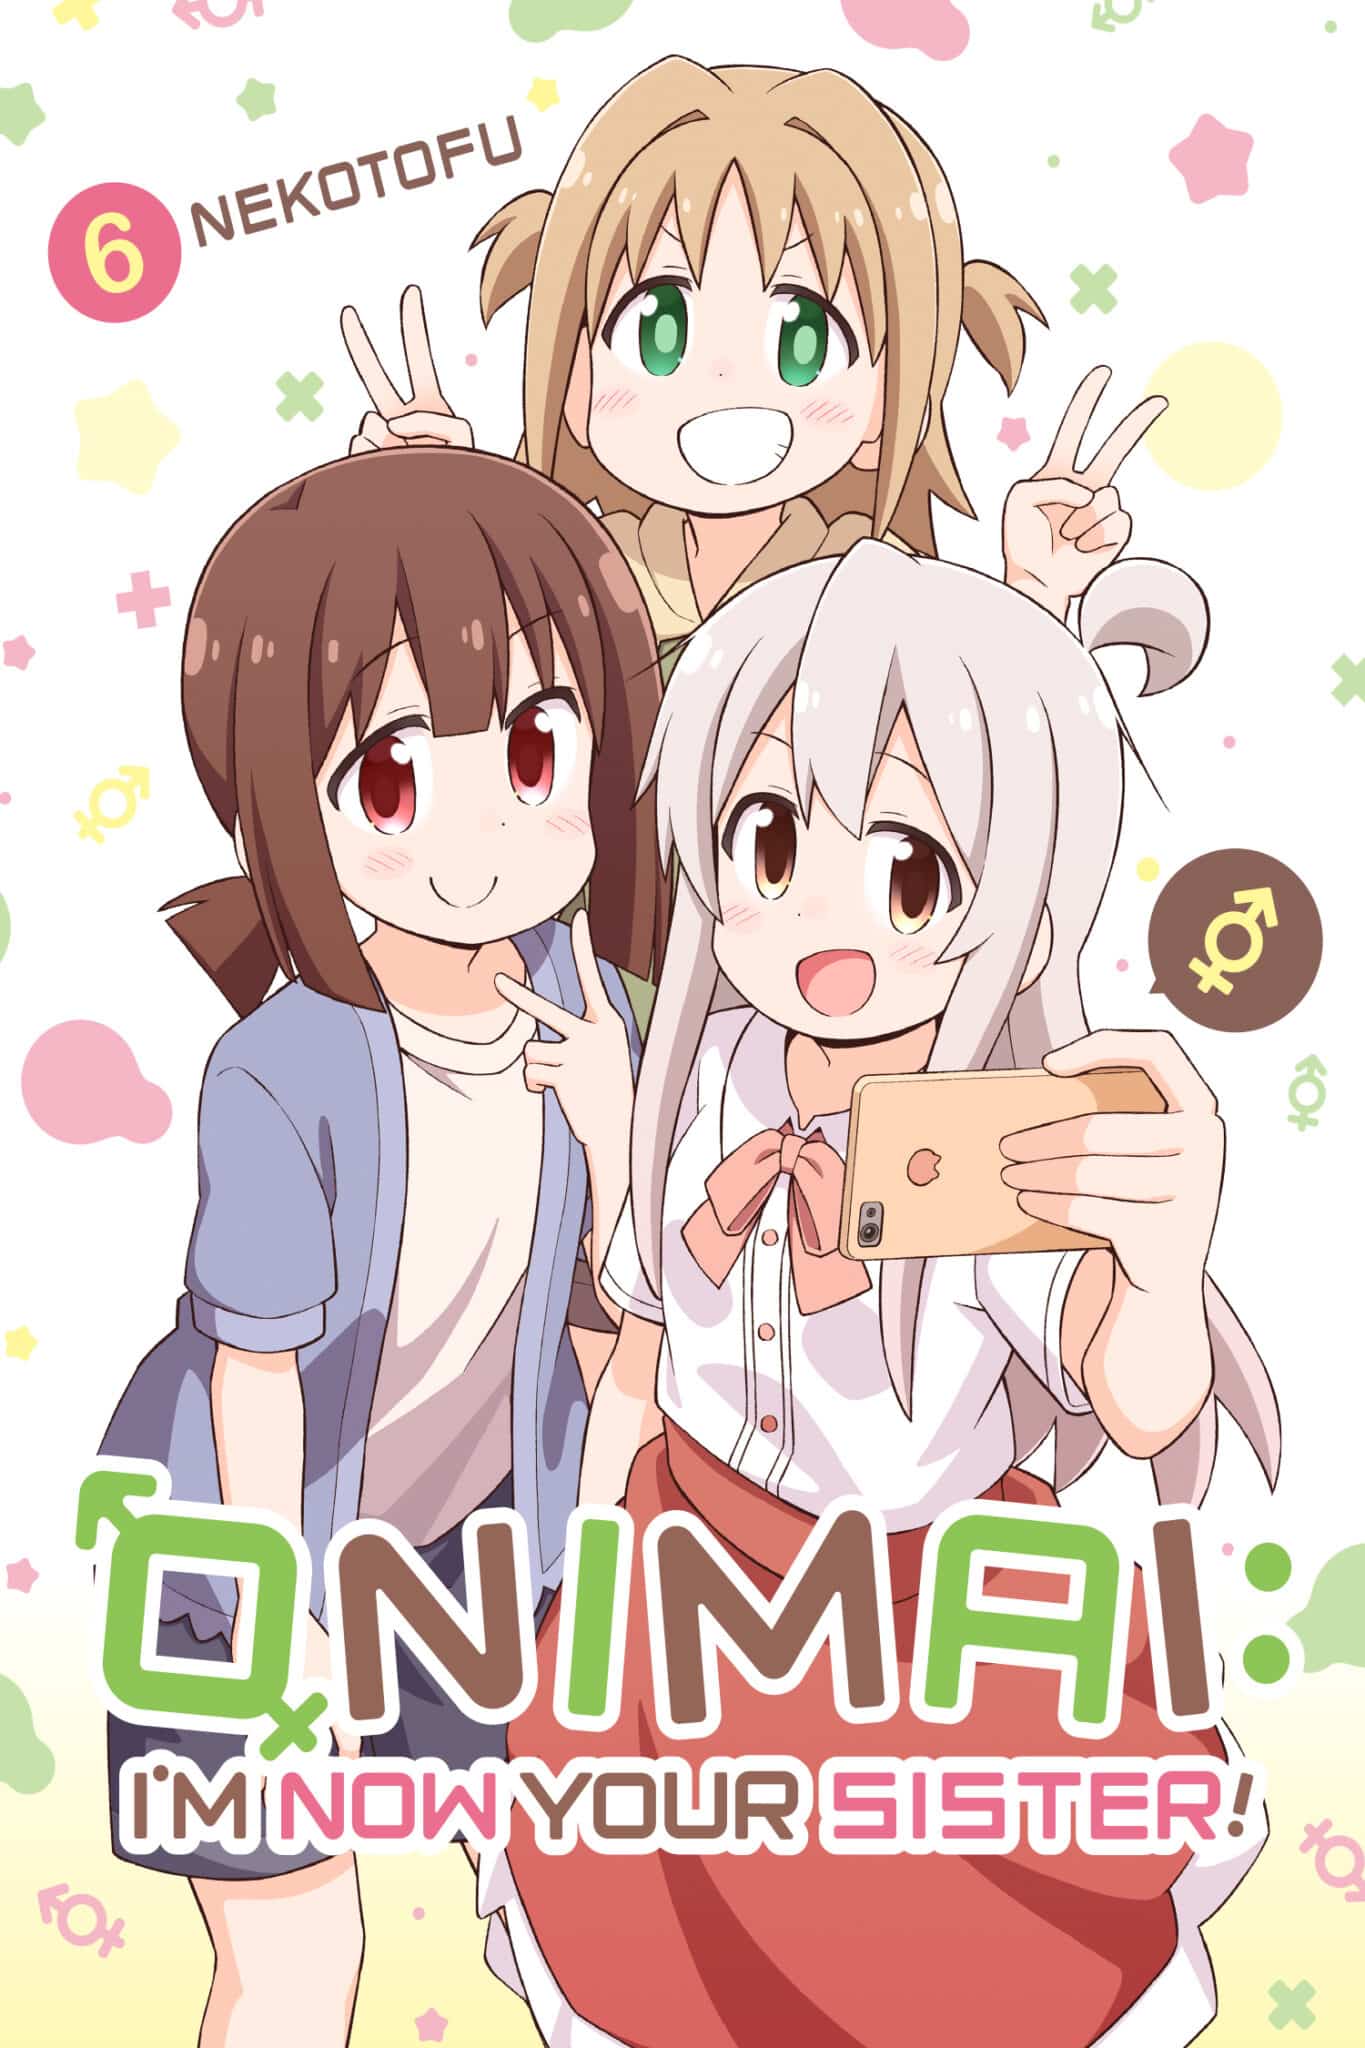 Onimai: I'm Now Your Sister! Volume 6